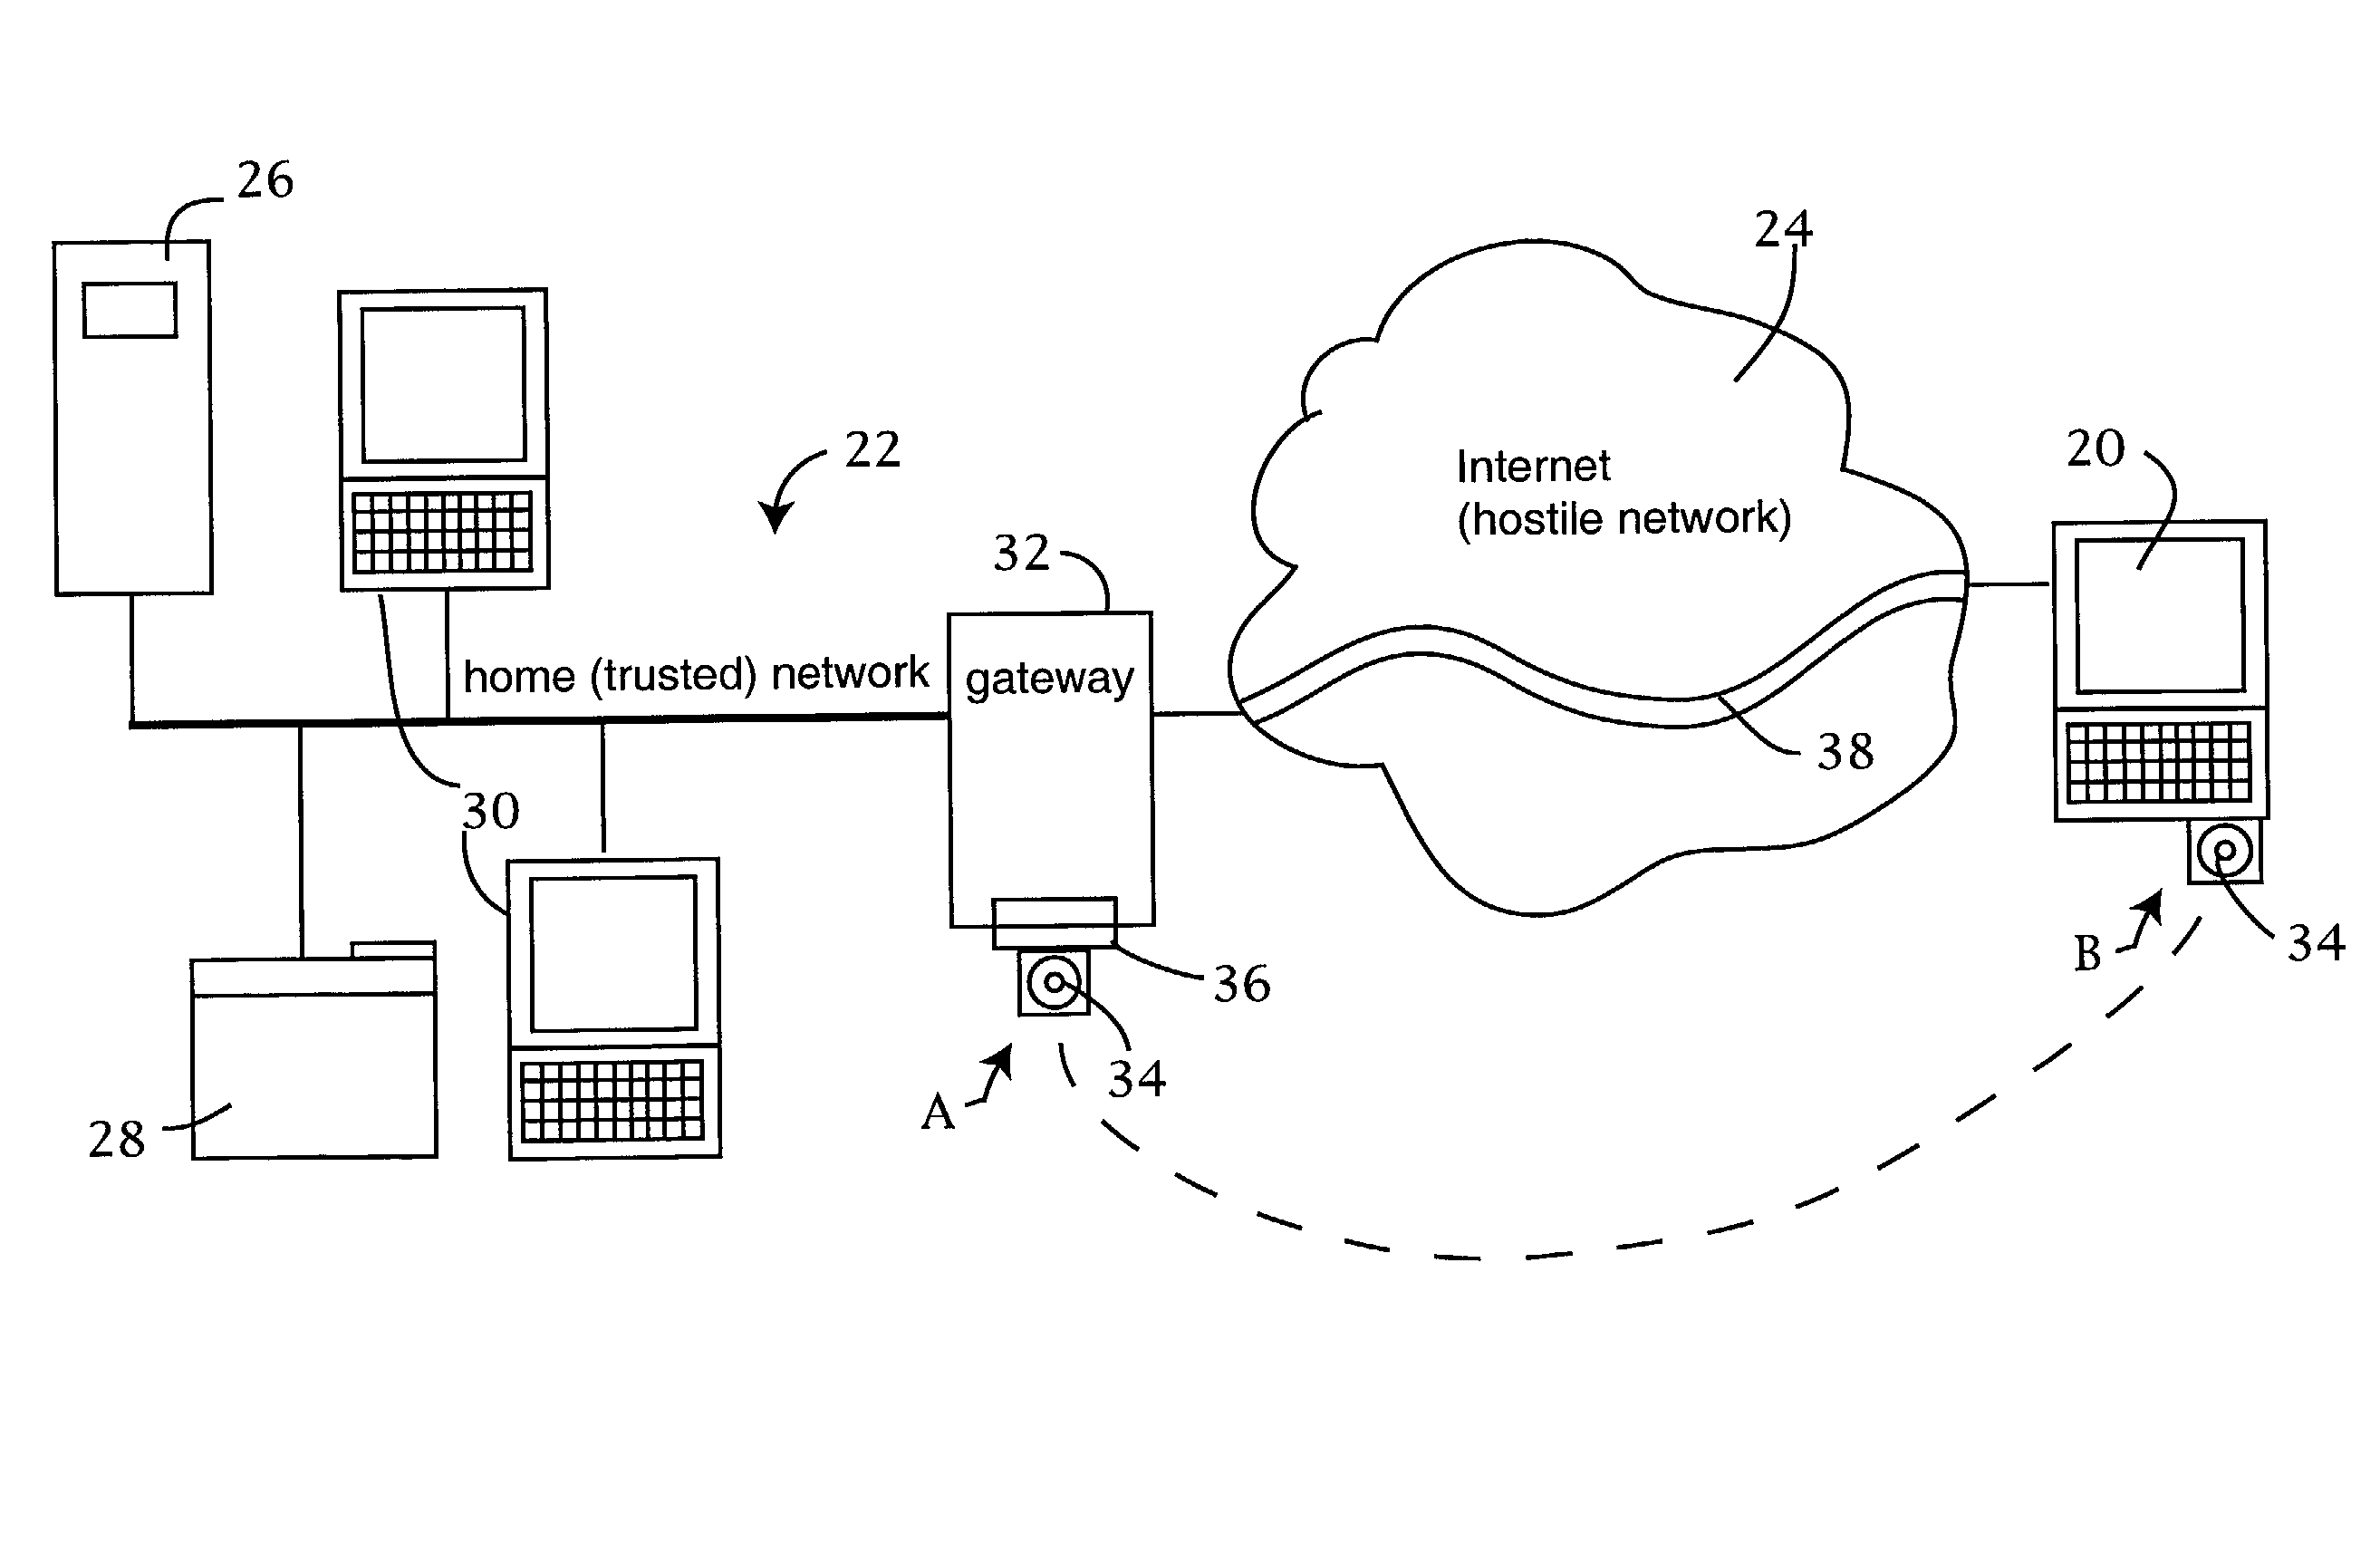 Computer network security system employing portable storage device